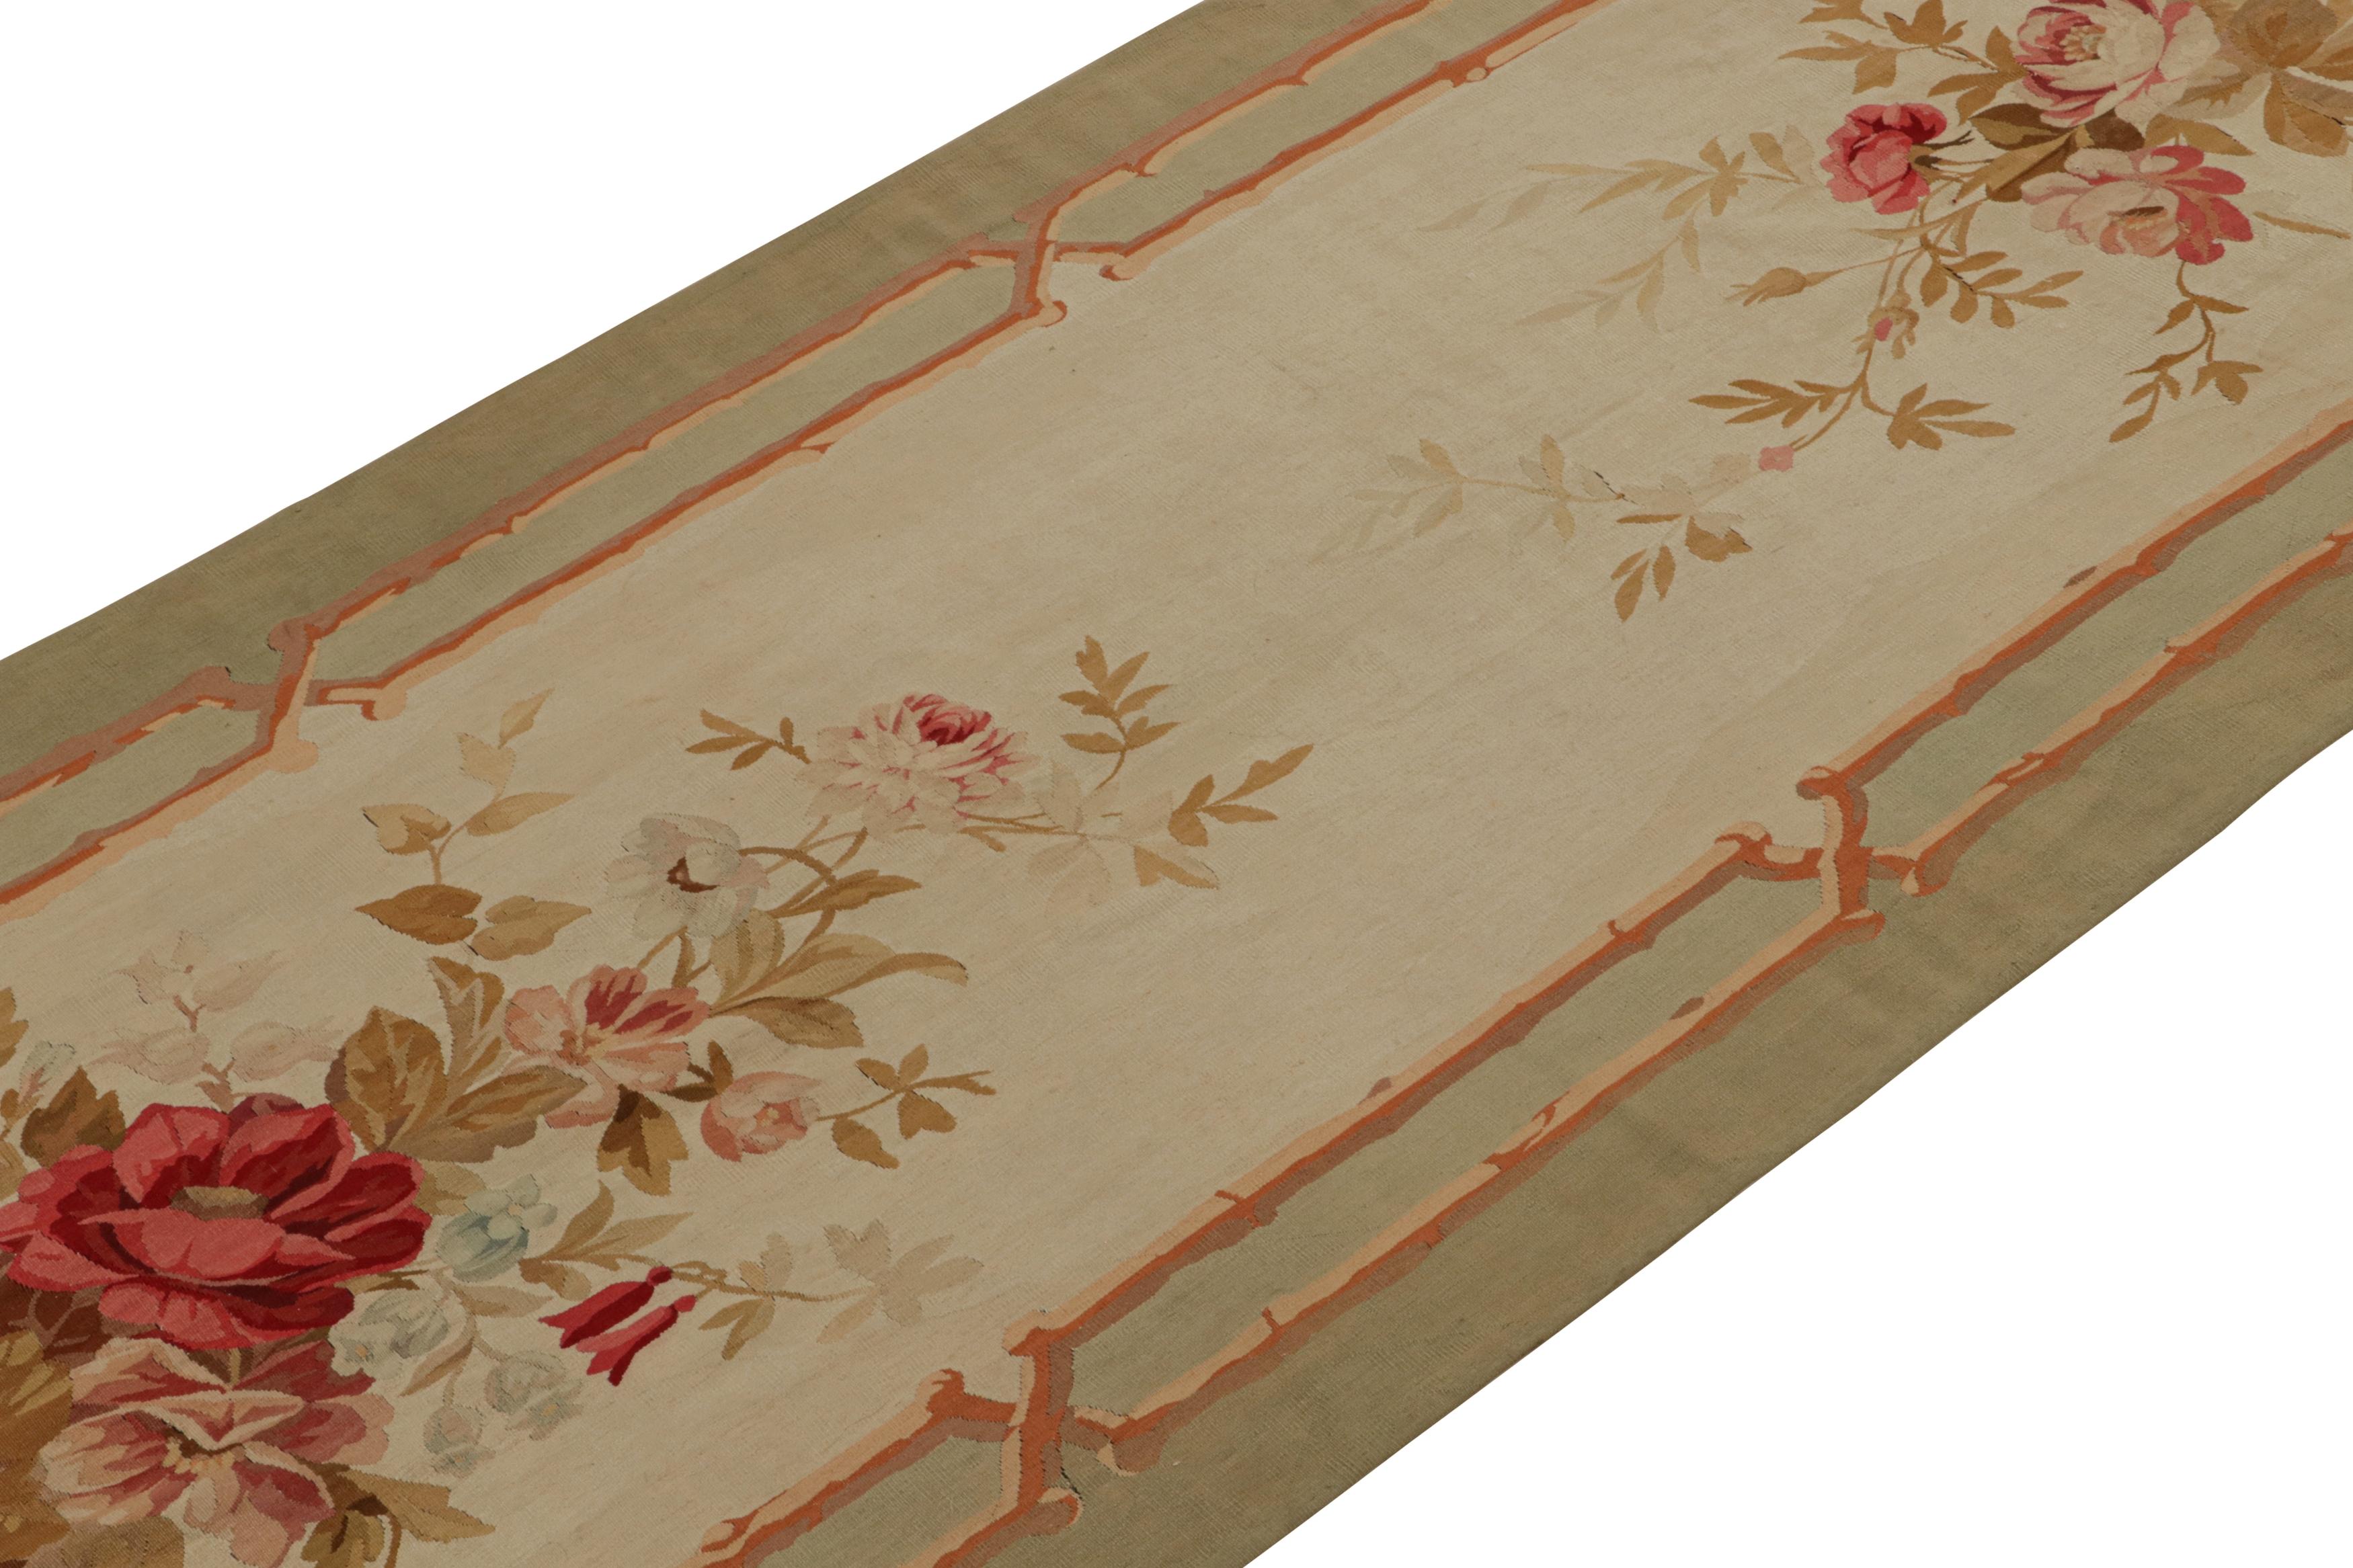 Hand-Woven Antique Floral Aubusson Tapestry Runner Rug in Cream & Green, from Rug & Kilim For Sale